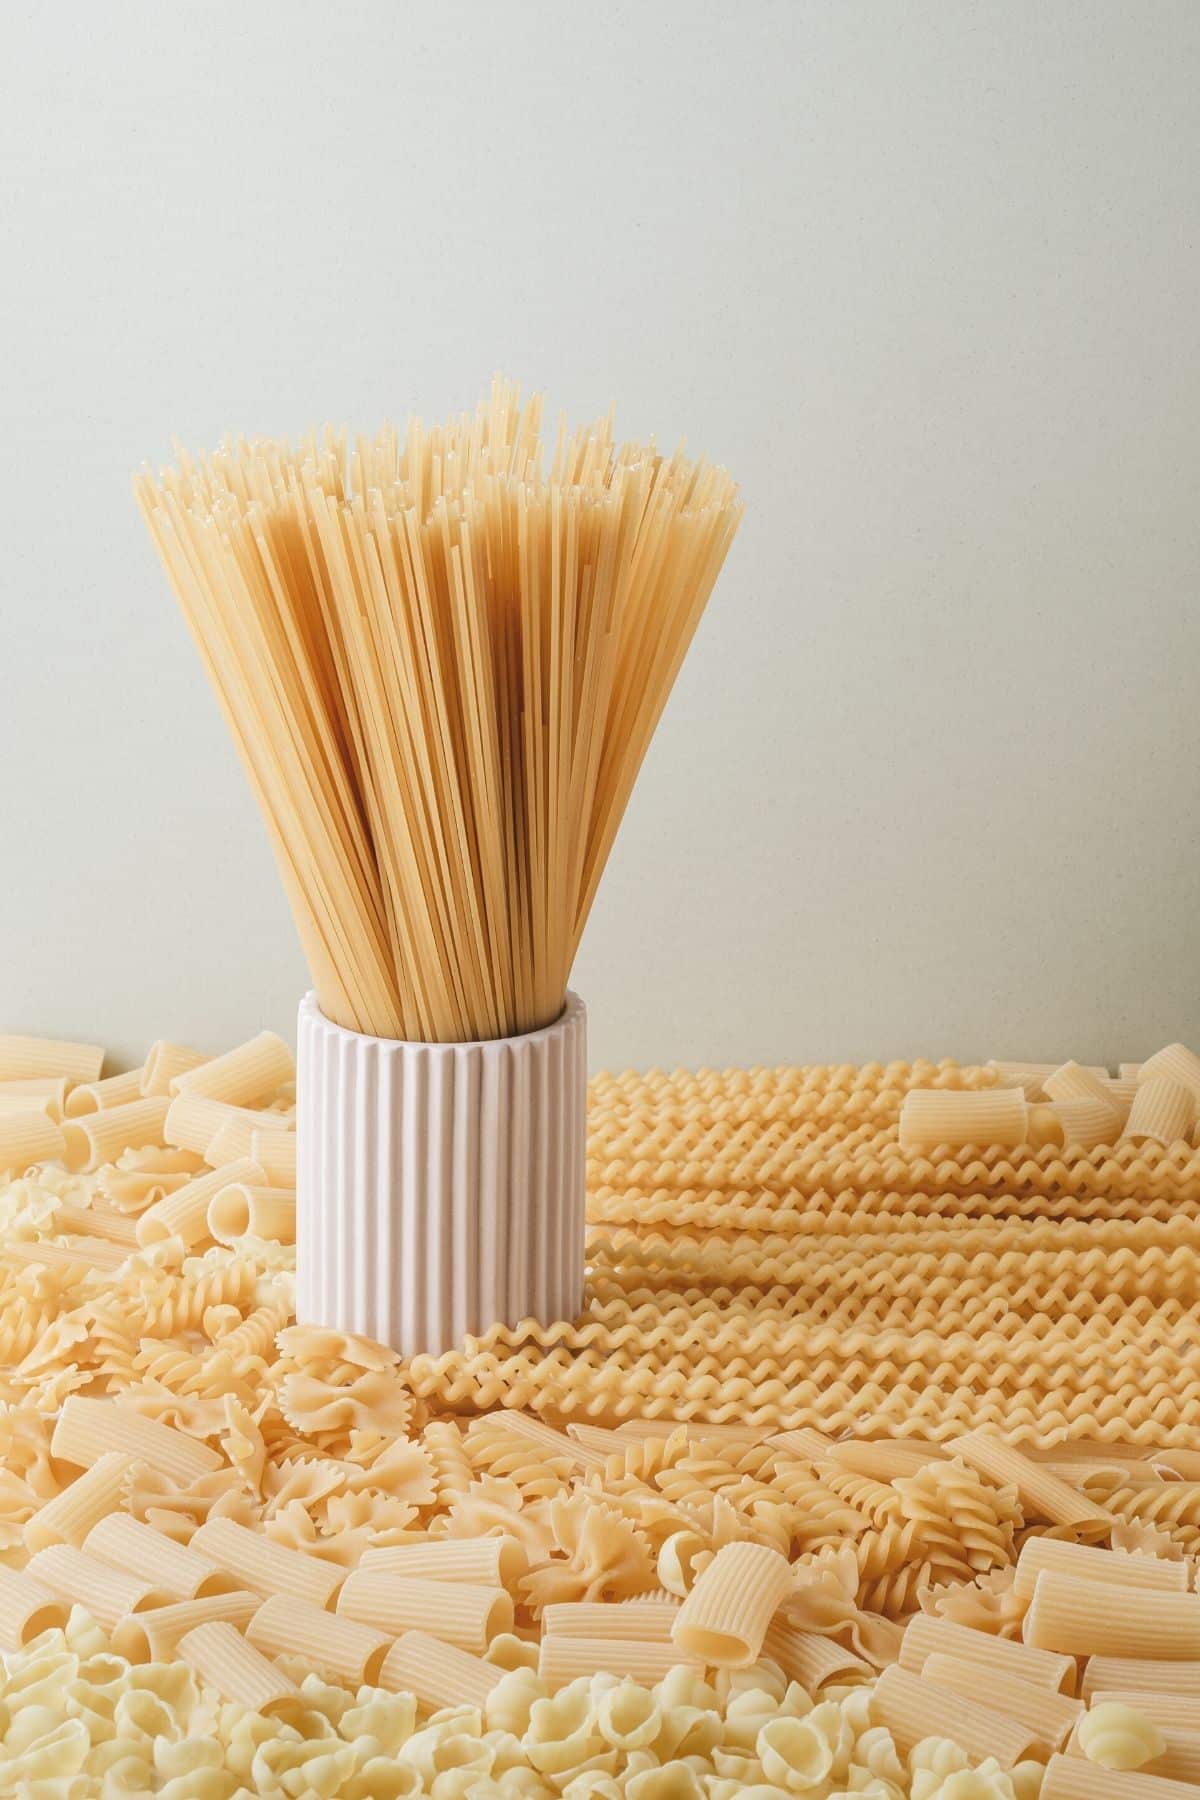 dry pastas of varying types on a table.